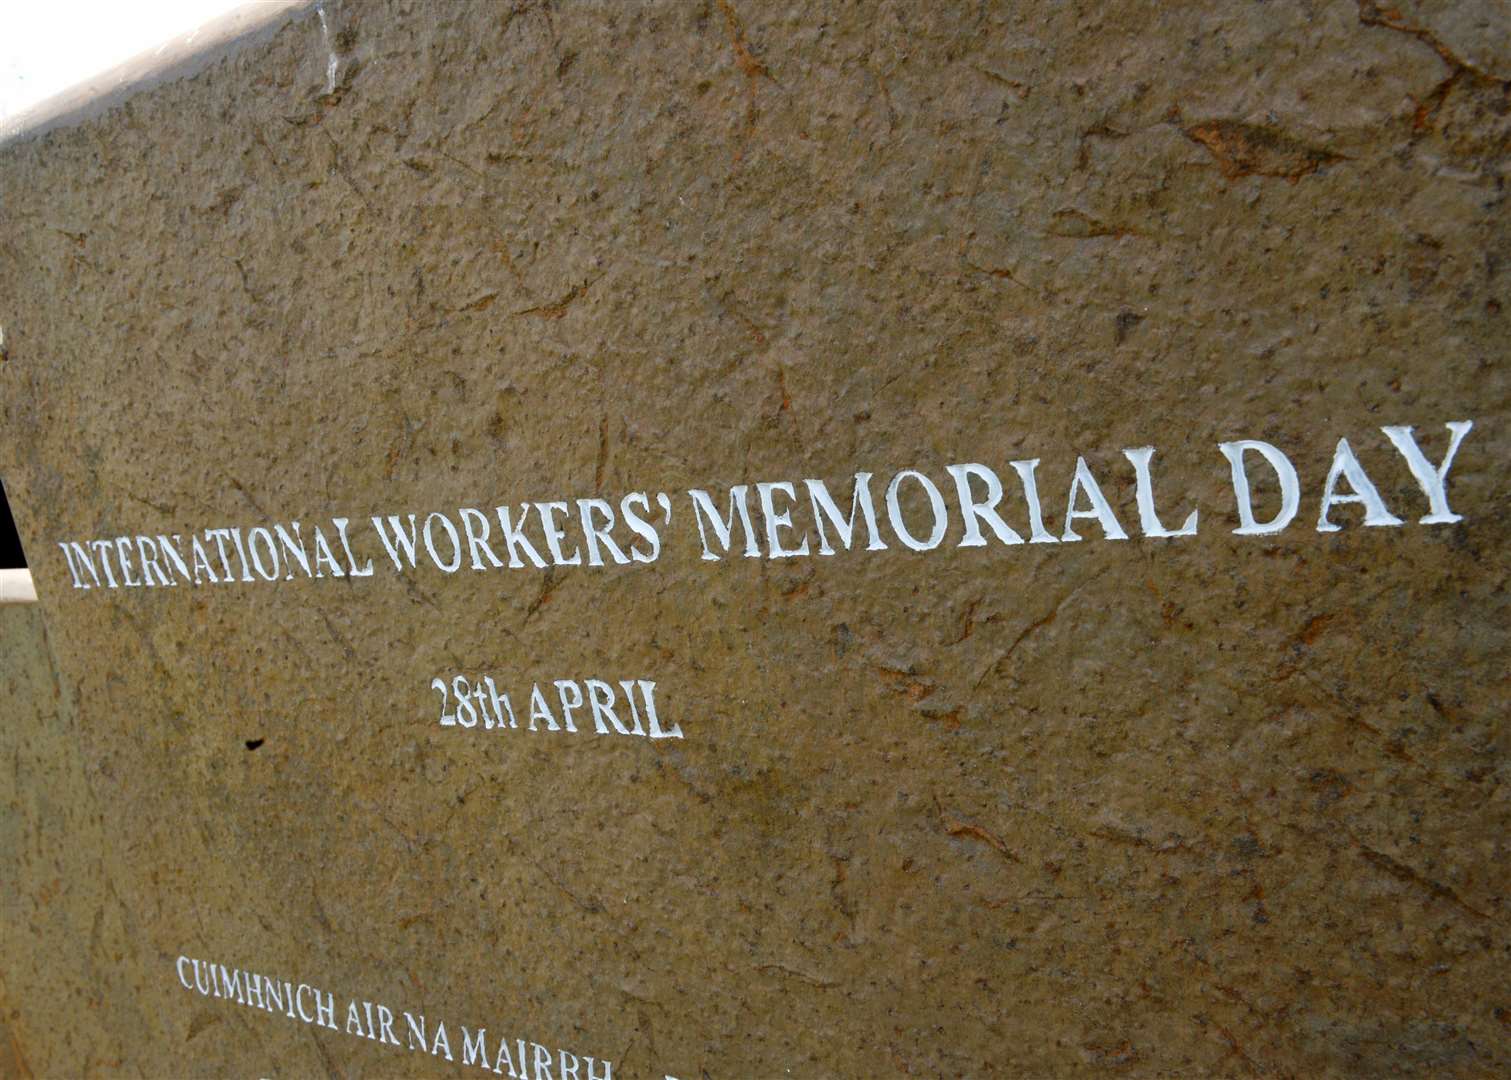 International Workers' Memorial Day will be marked in Inverness on April 26.